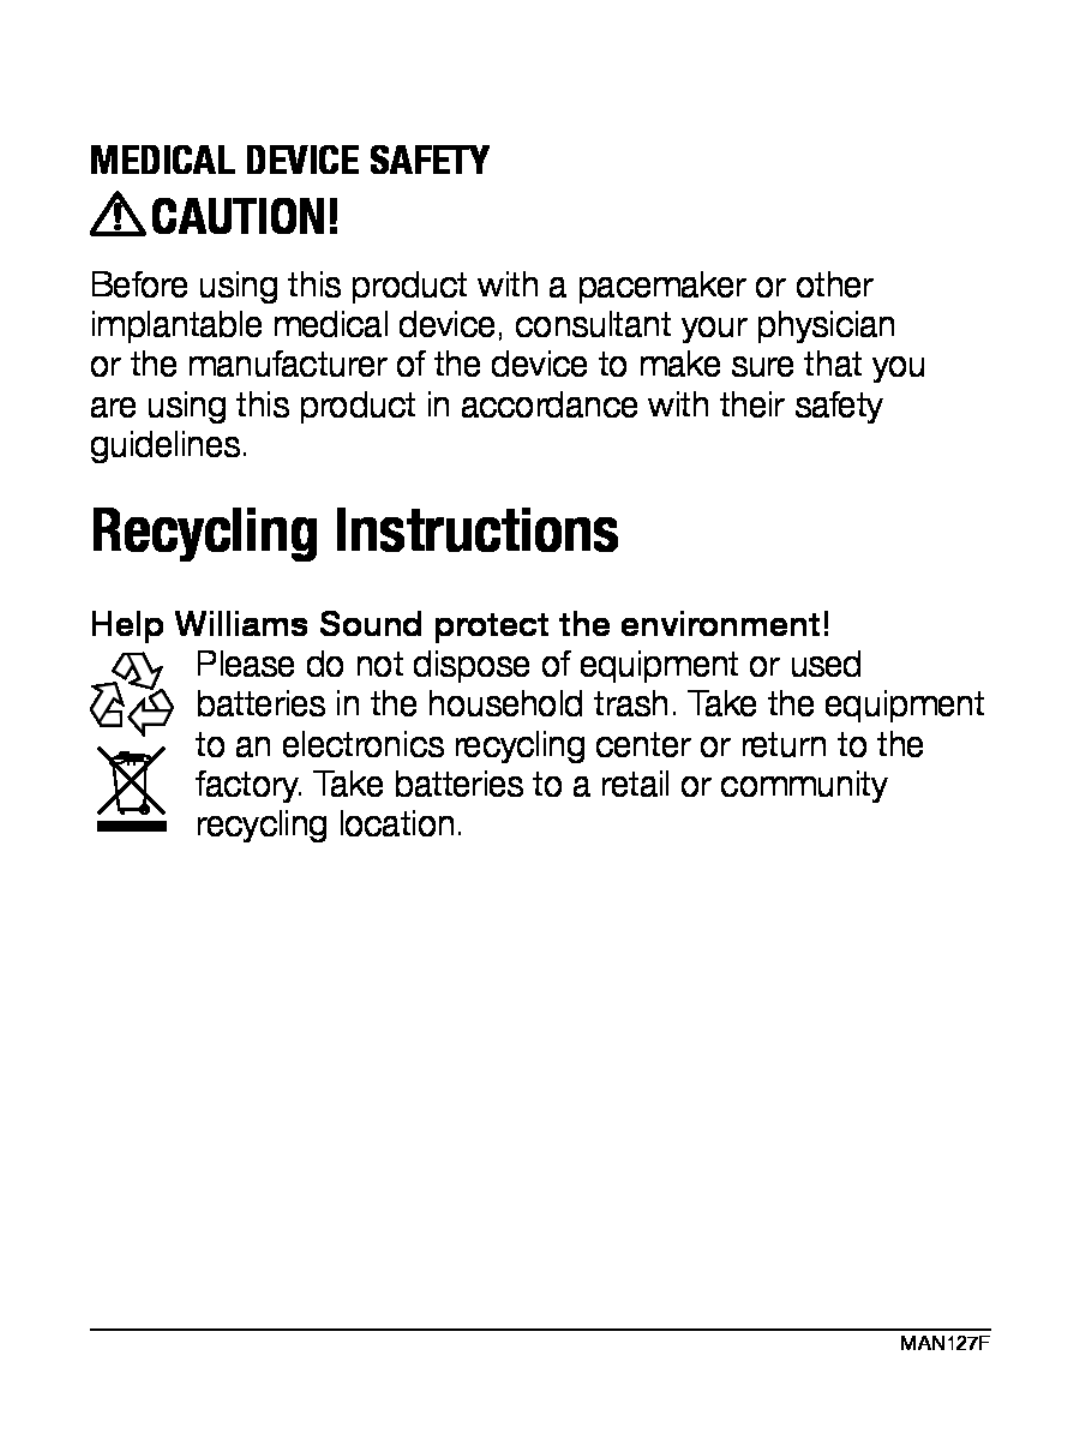 Williams Sound WIR RX22-4 manual Recycling Instructions, Medical Device Safety 